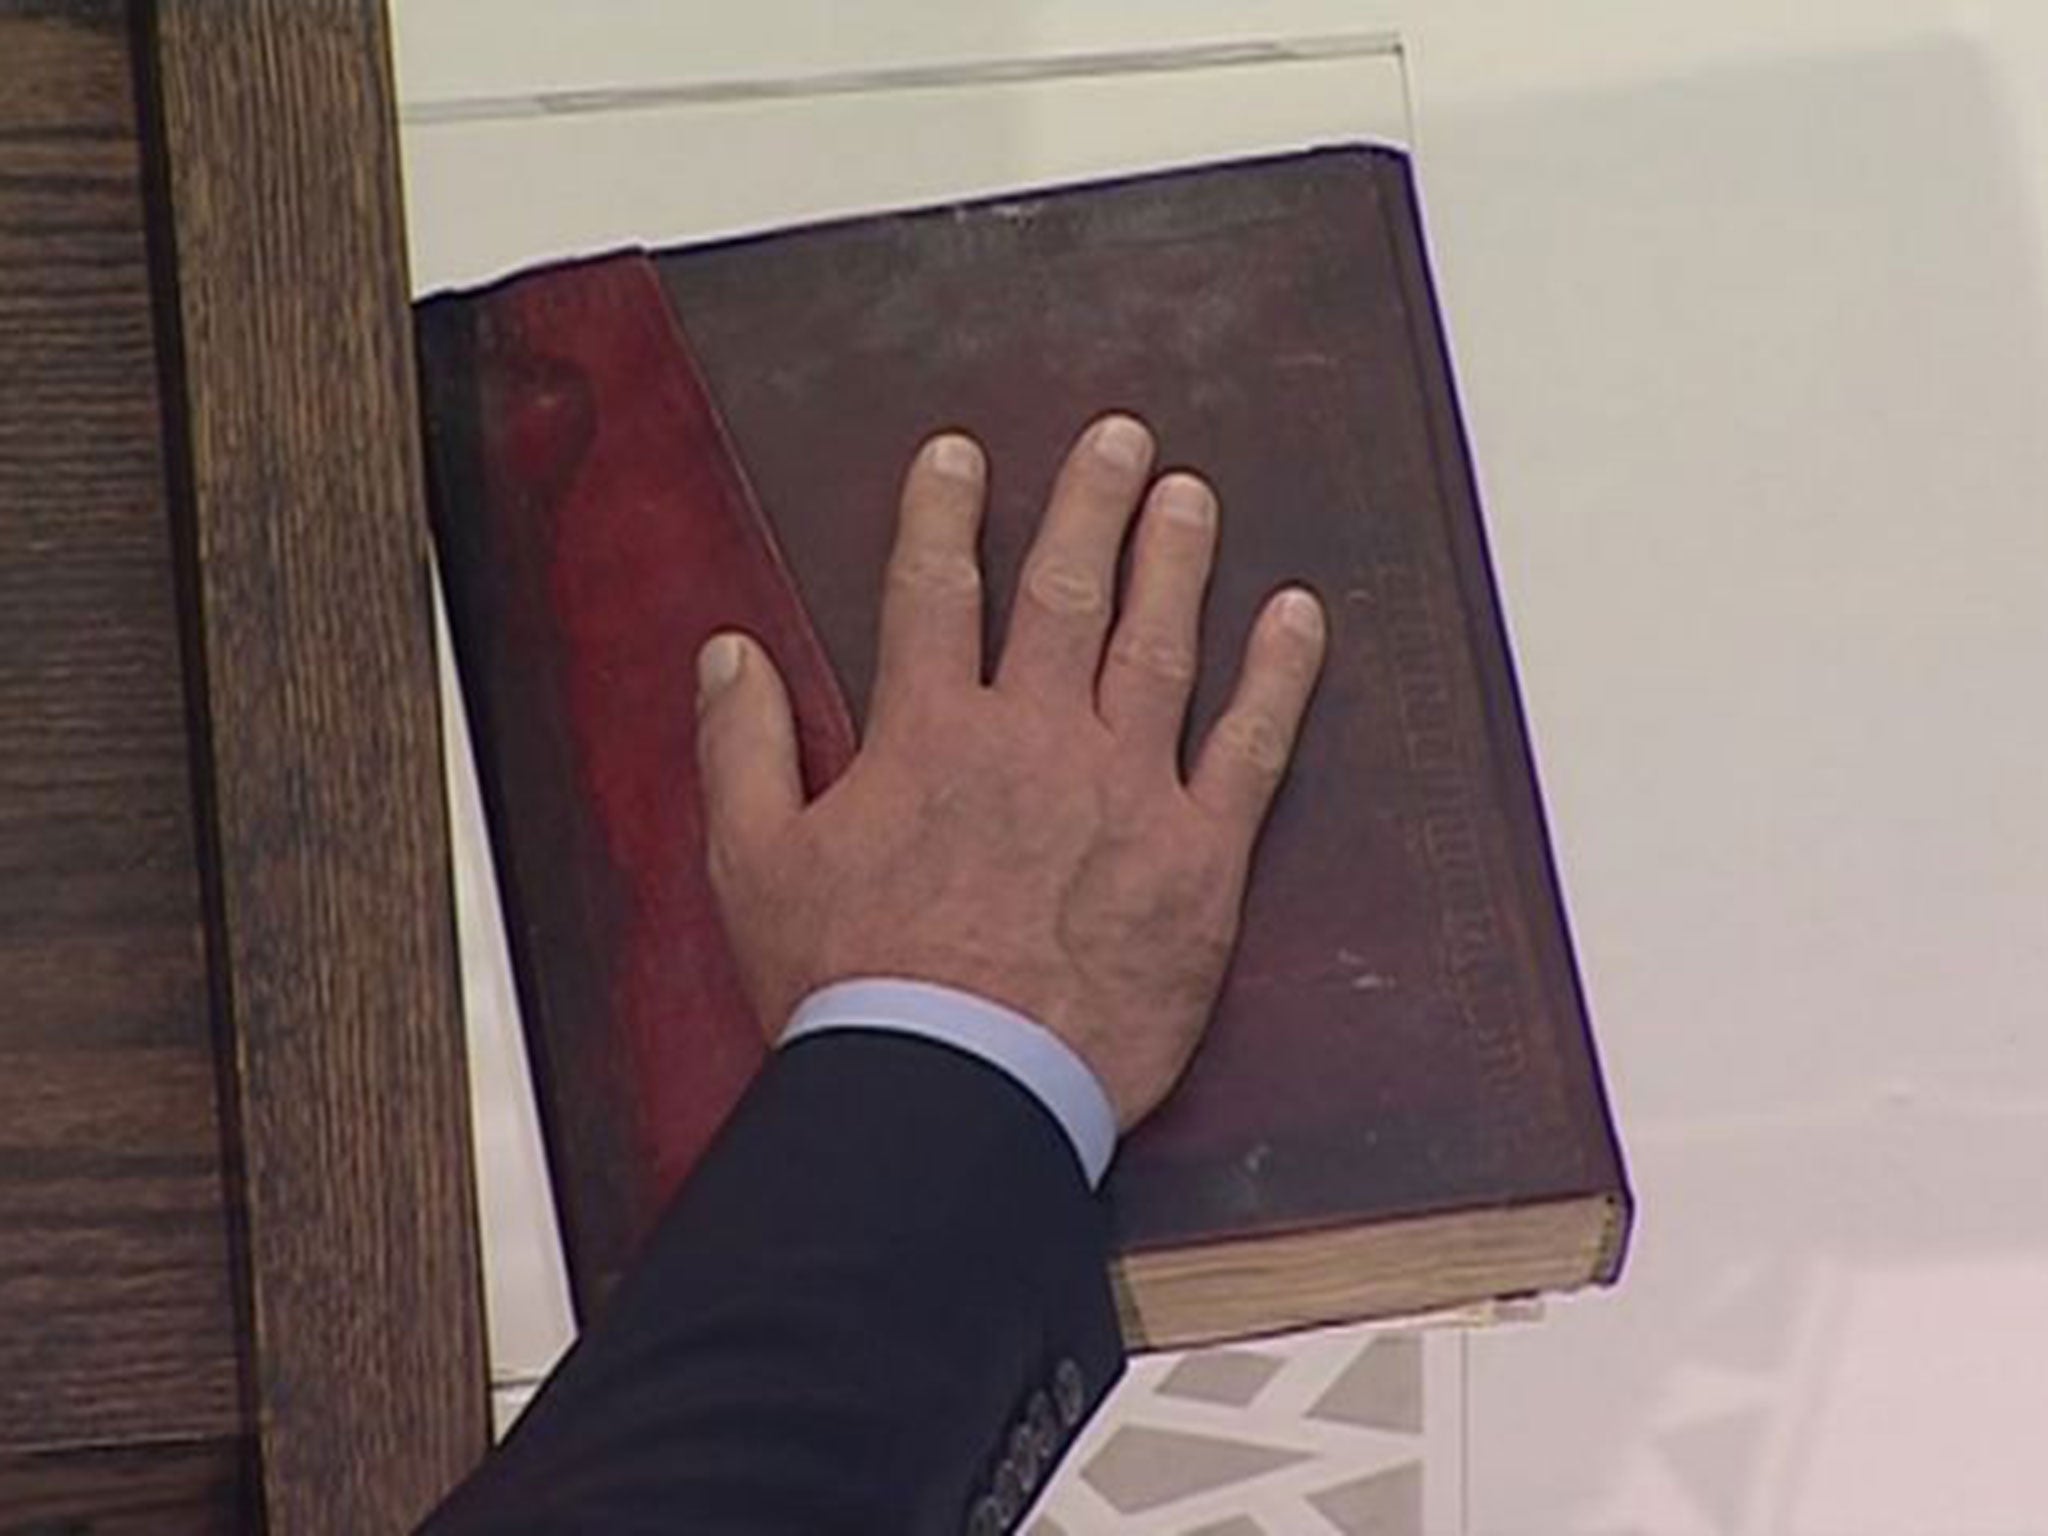 Assad places his hand on the Qur'an during the swearing-in (REUTERS)